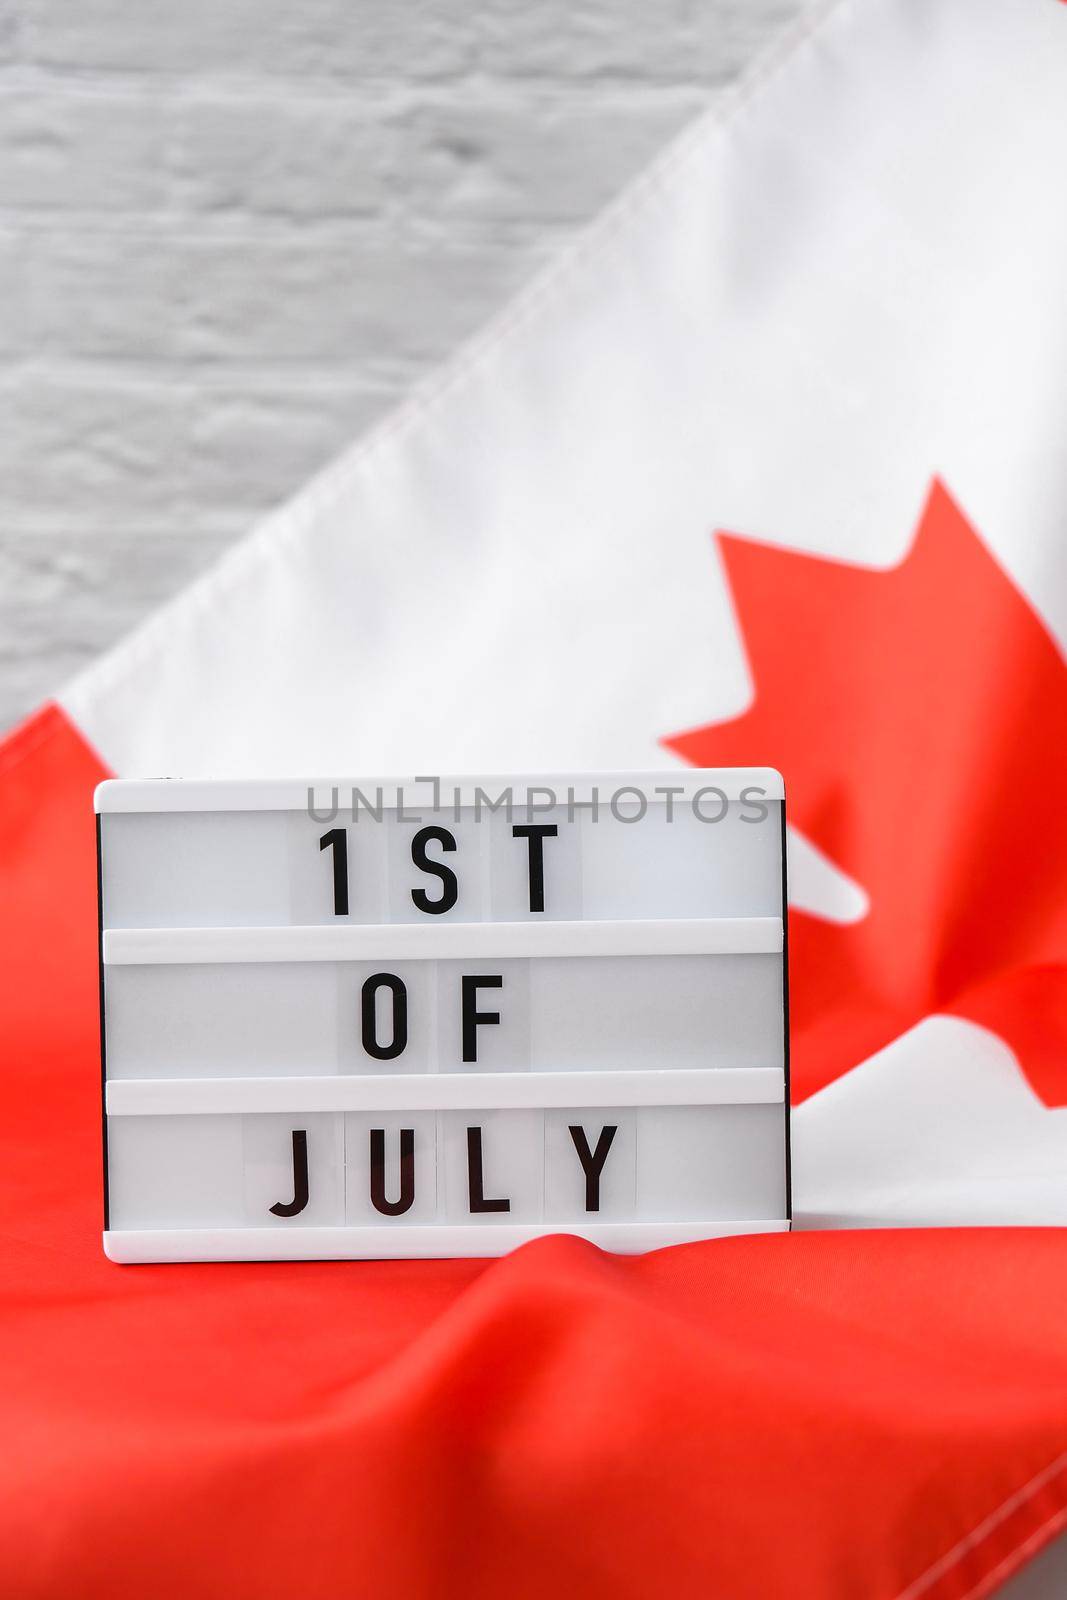 The National Flag of Canada. Lightbox with text 1ST OF JULY Canadian Flag or the Maple Leaf. Patriotism. International relations concept. Independence day. Immigration